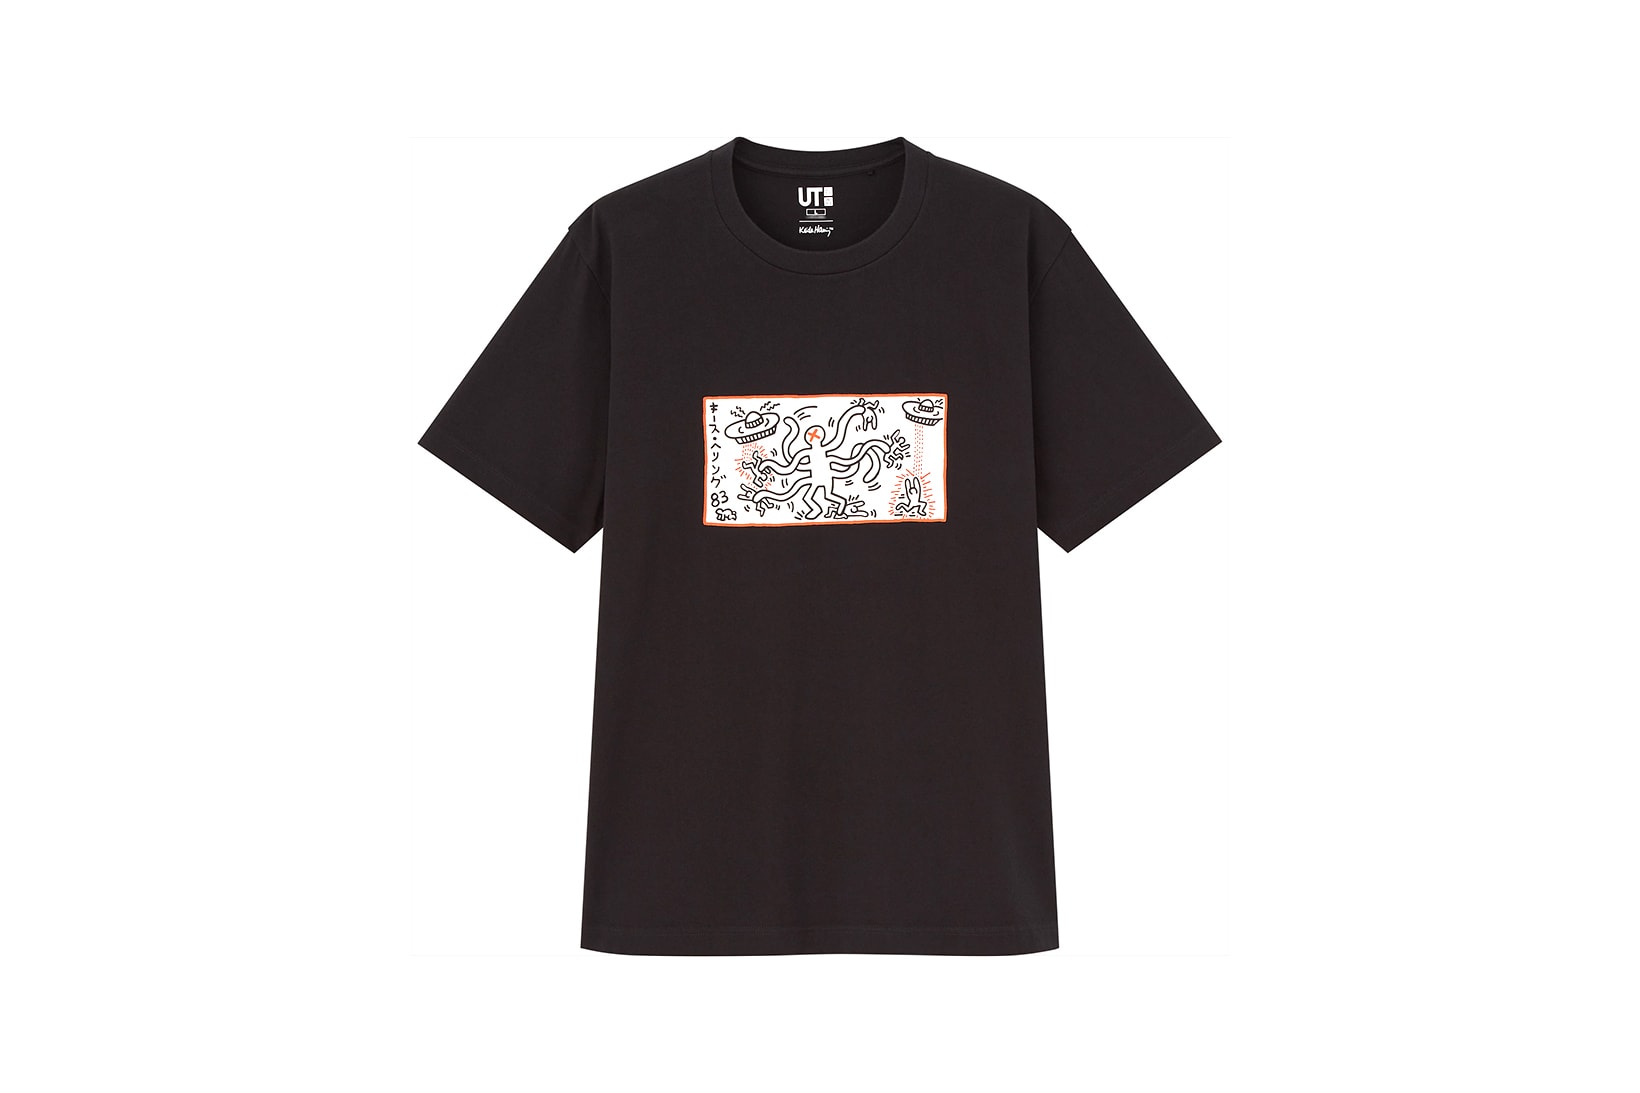 keith haring uniqlo collaboration tees t shirt black art graphic doodle